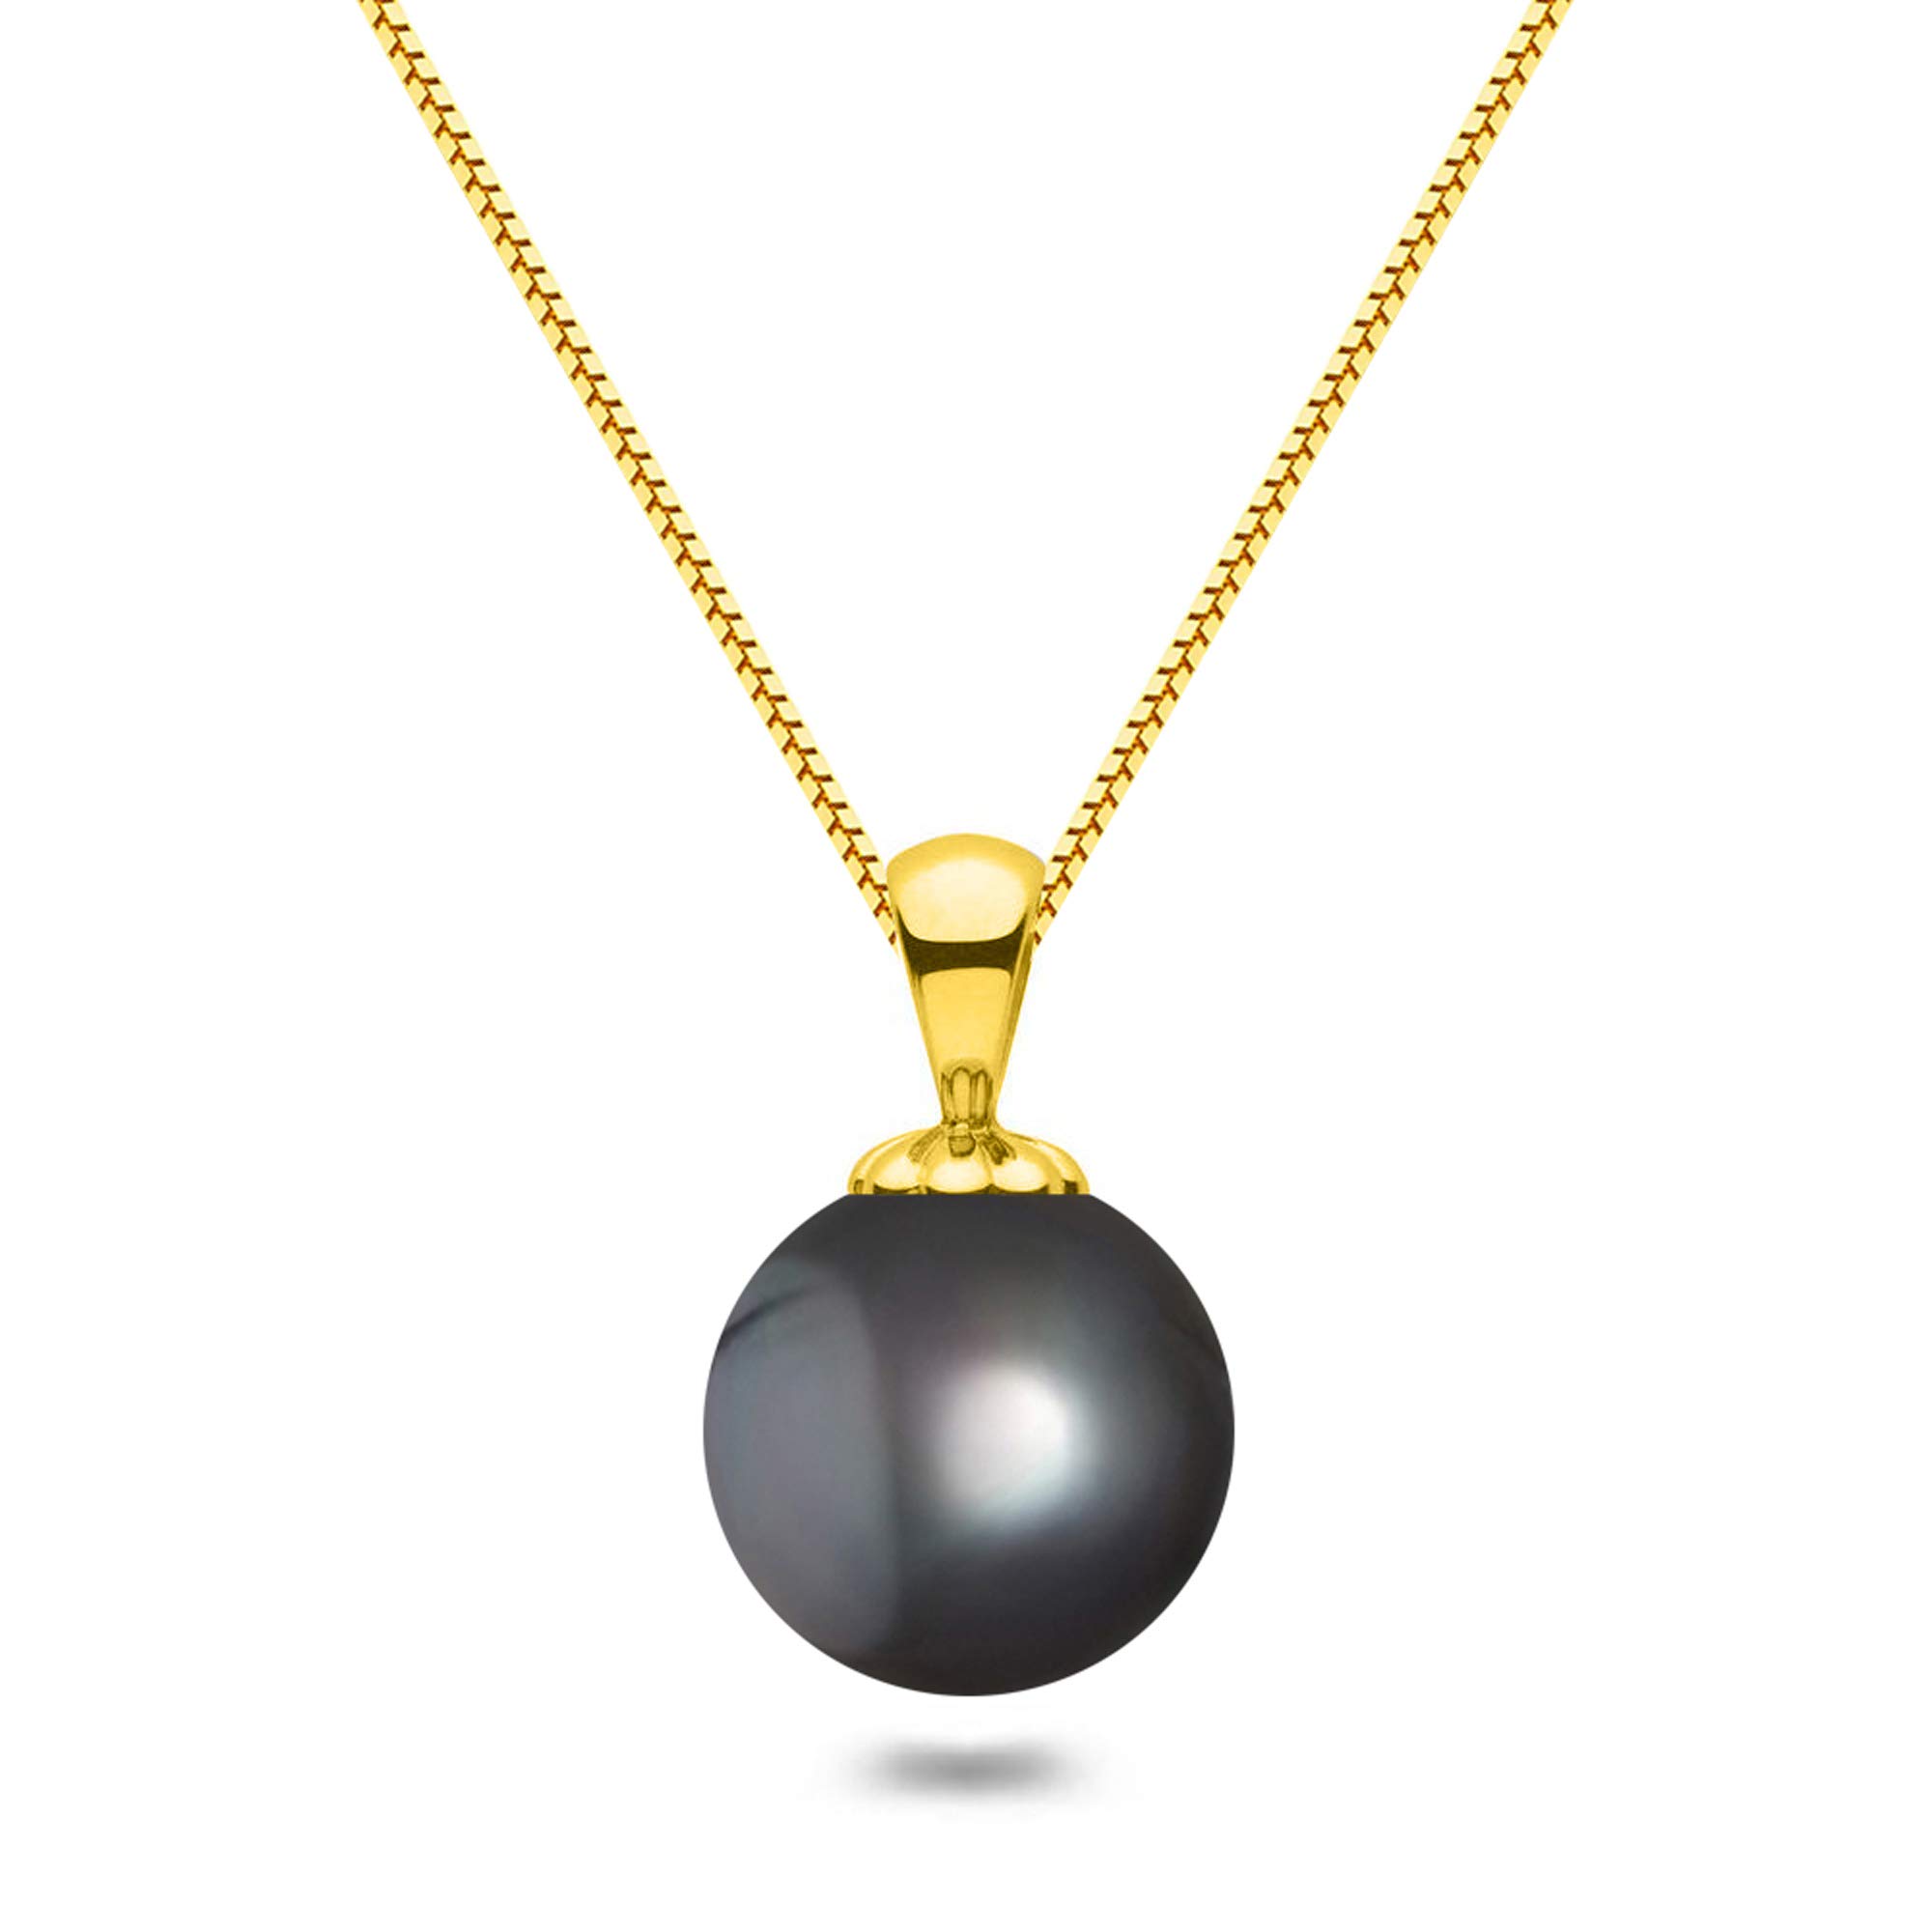 Orien Jewelry Black Japanese AAAA 6-13.5mm Freshwater Cultured Pearl Pendant Necklace 16